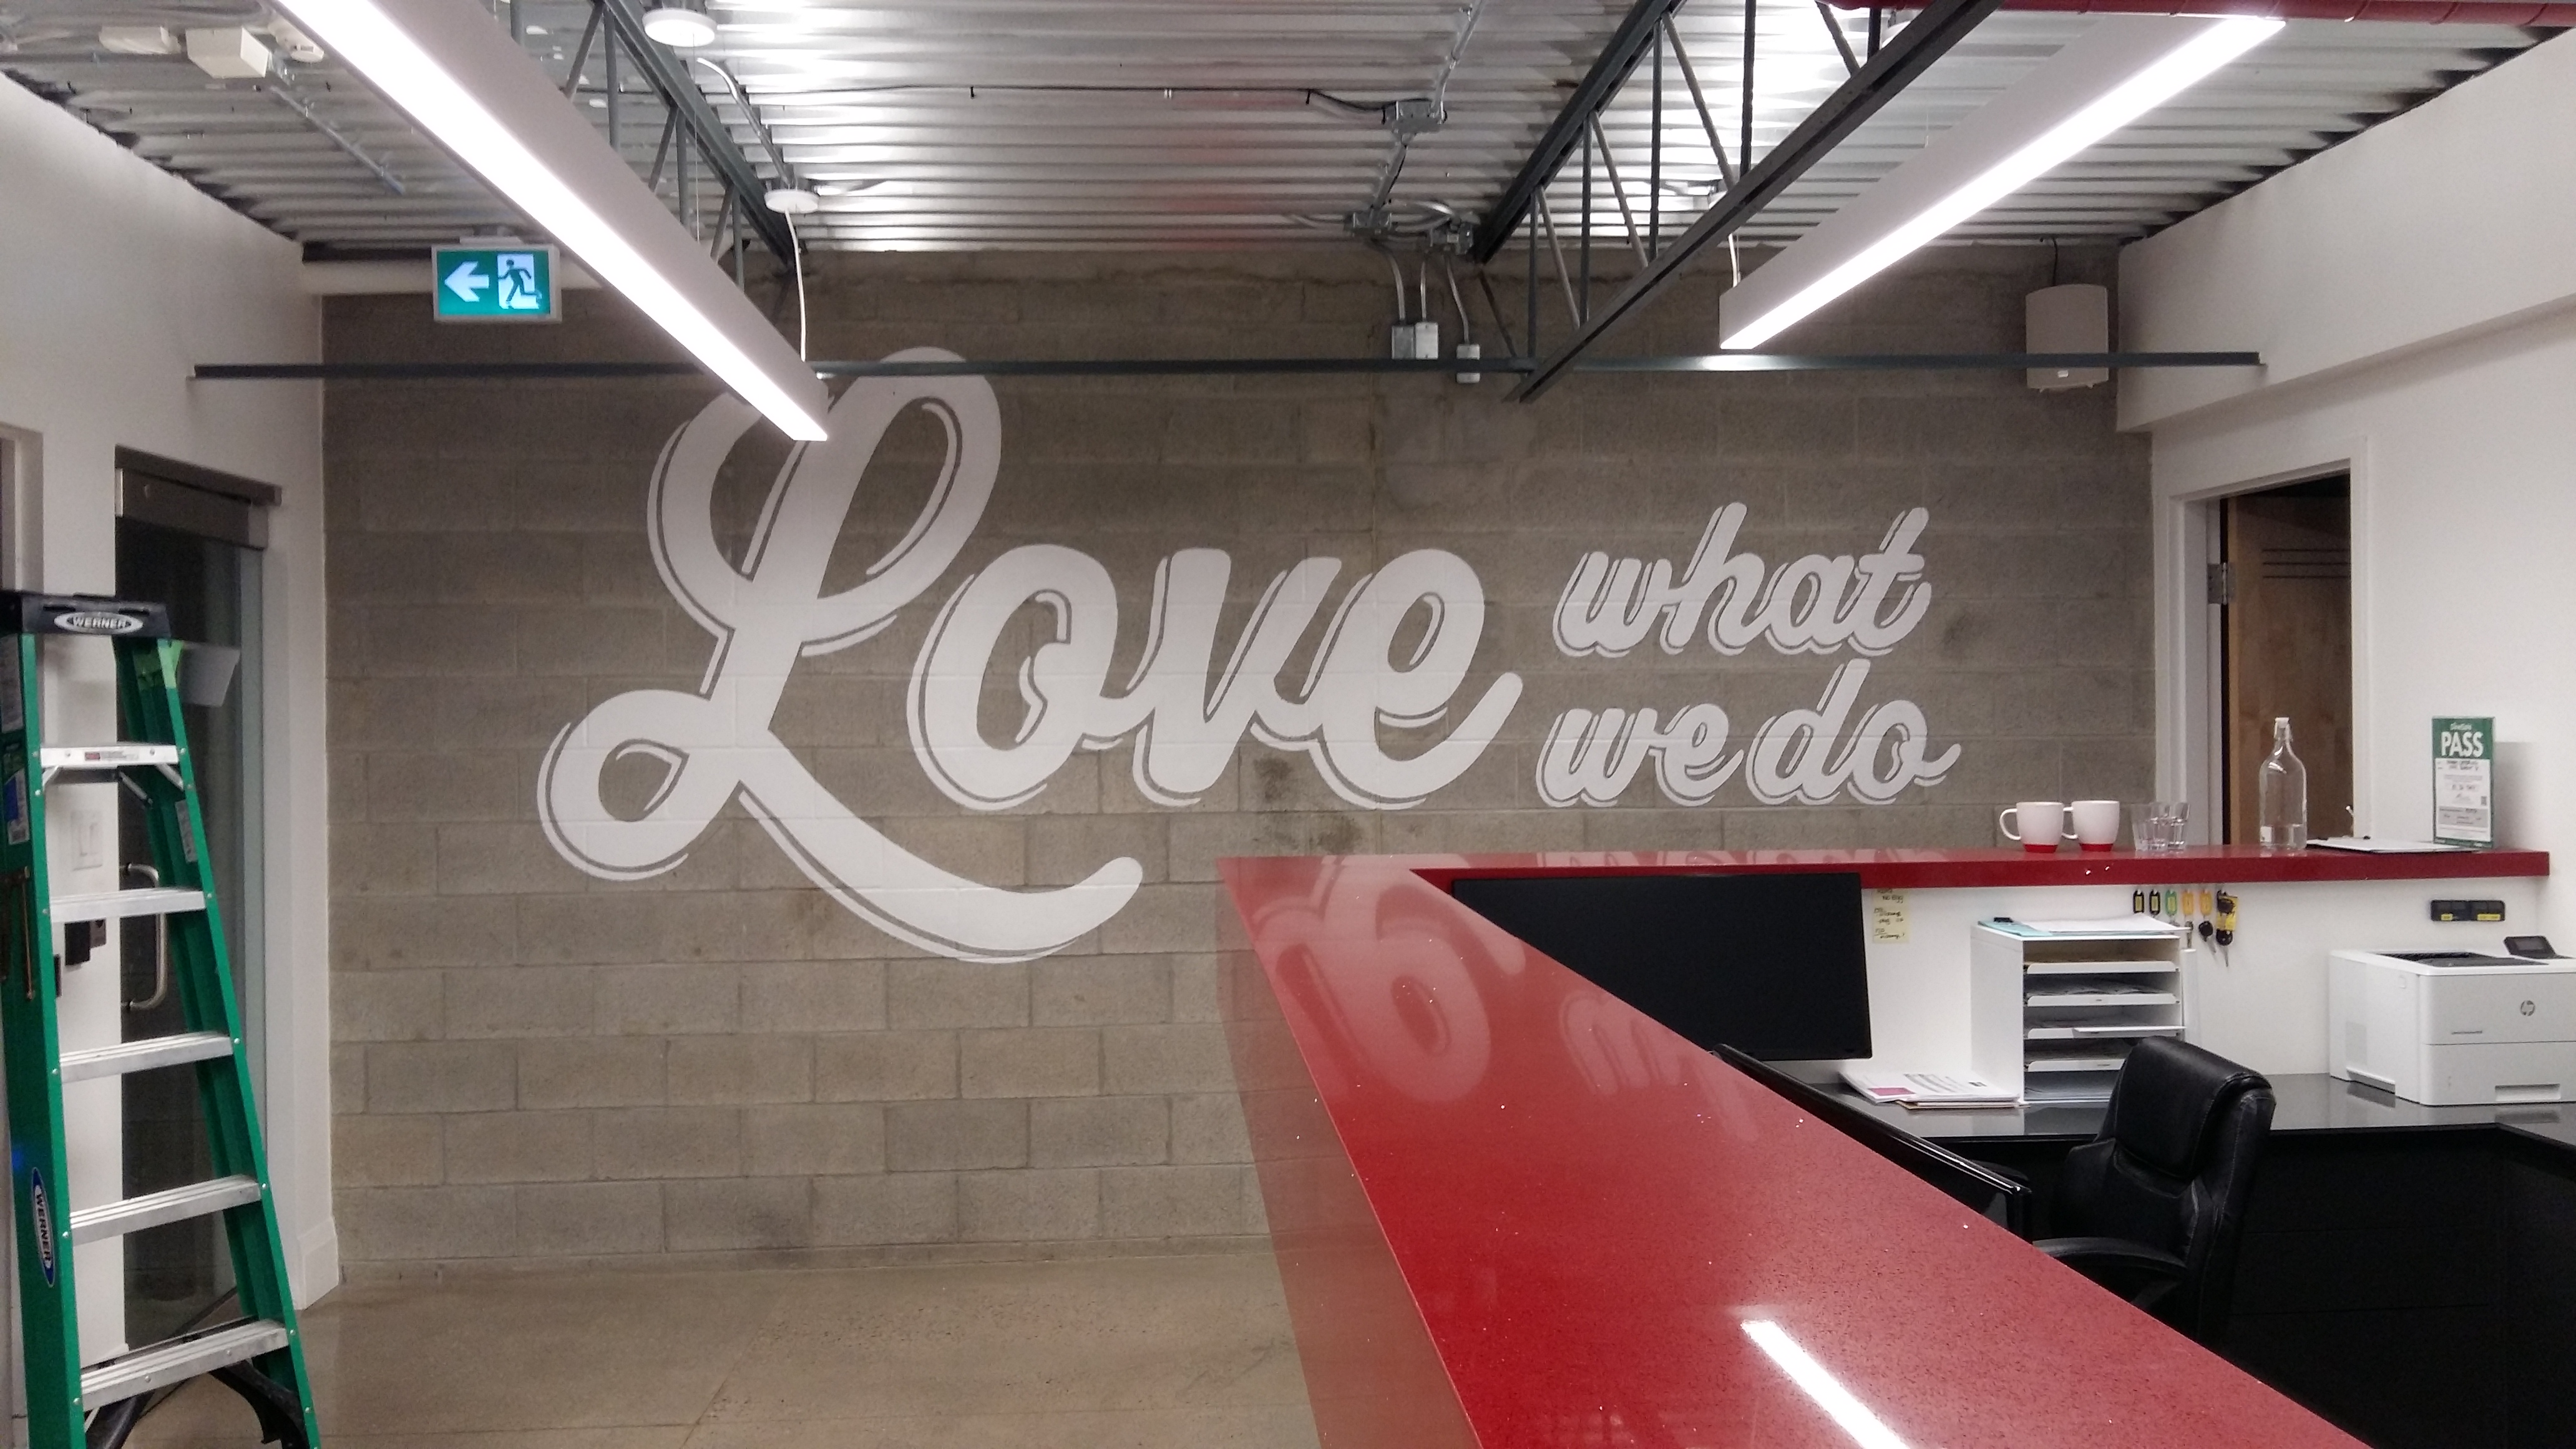 Painted lettering on wall